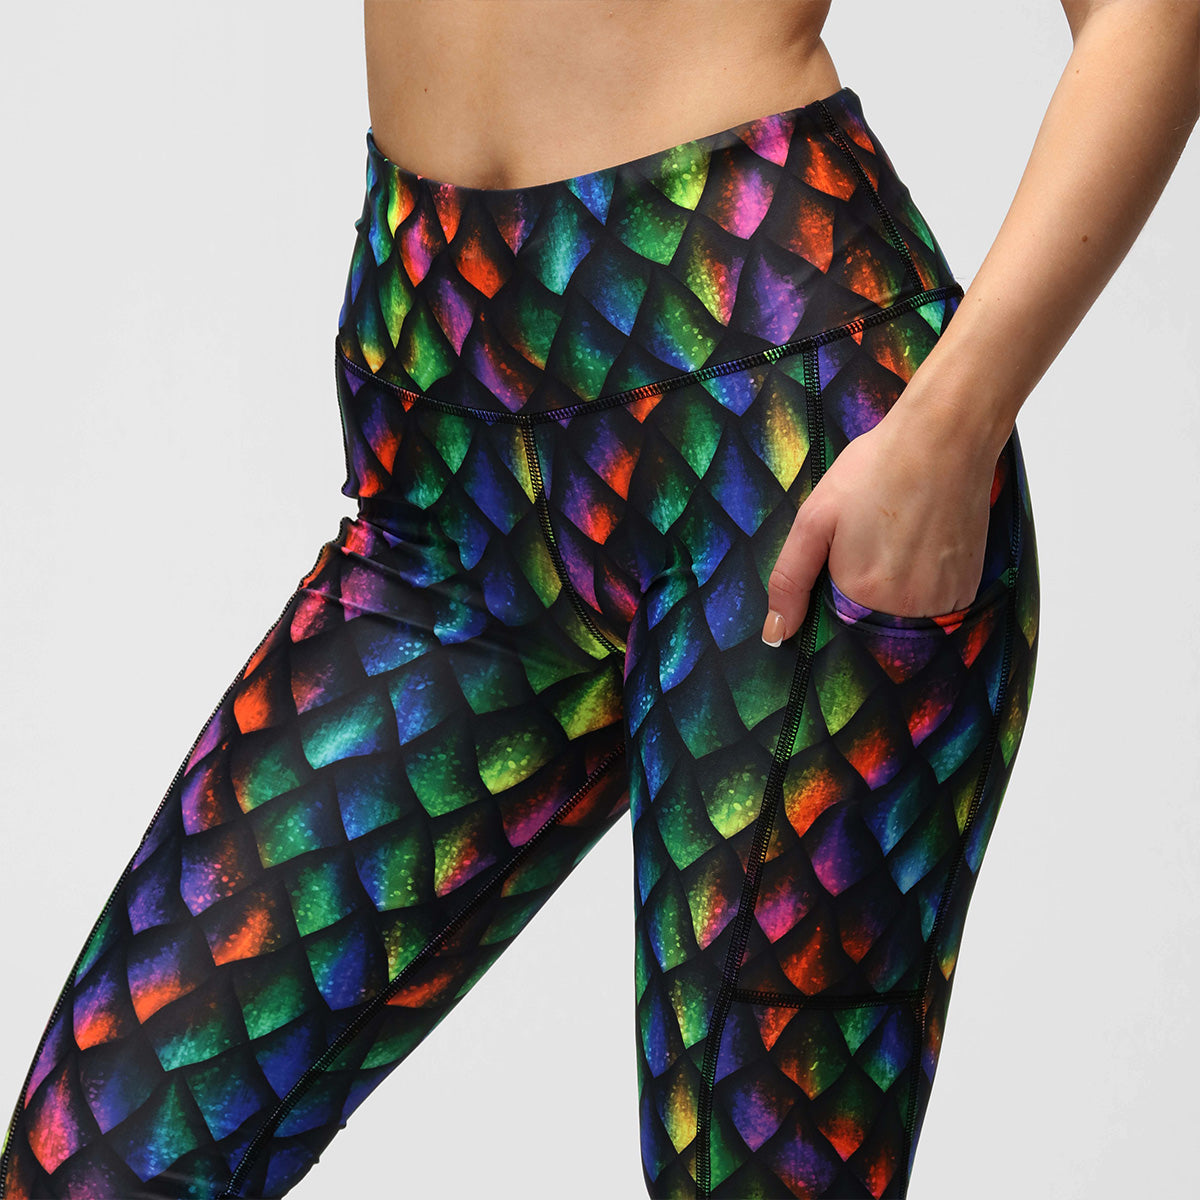 Asexual Scale Crossover leggings with pockets No Logo